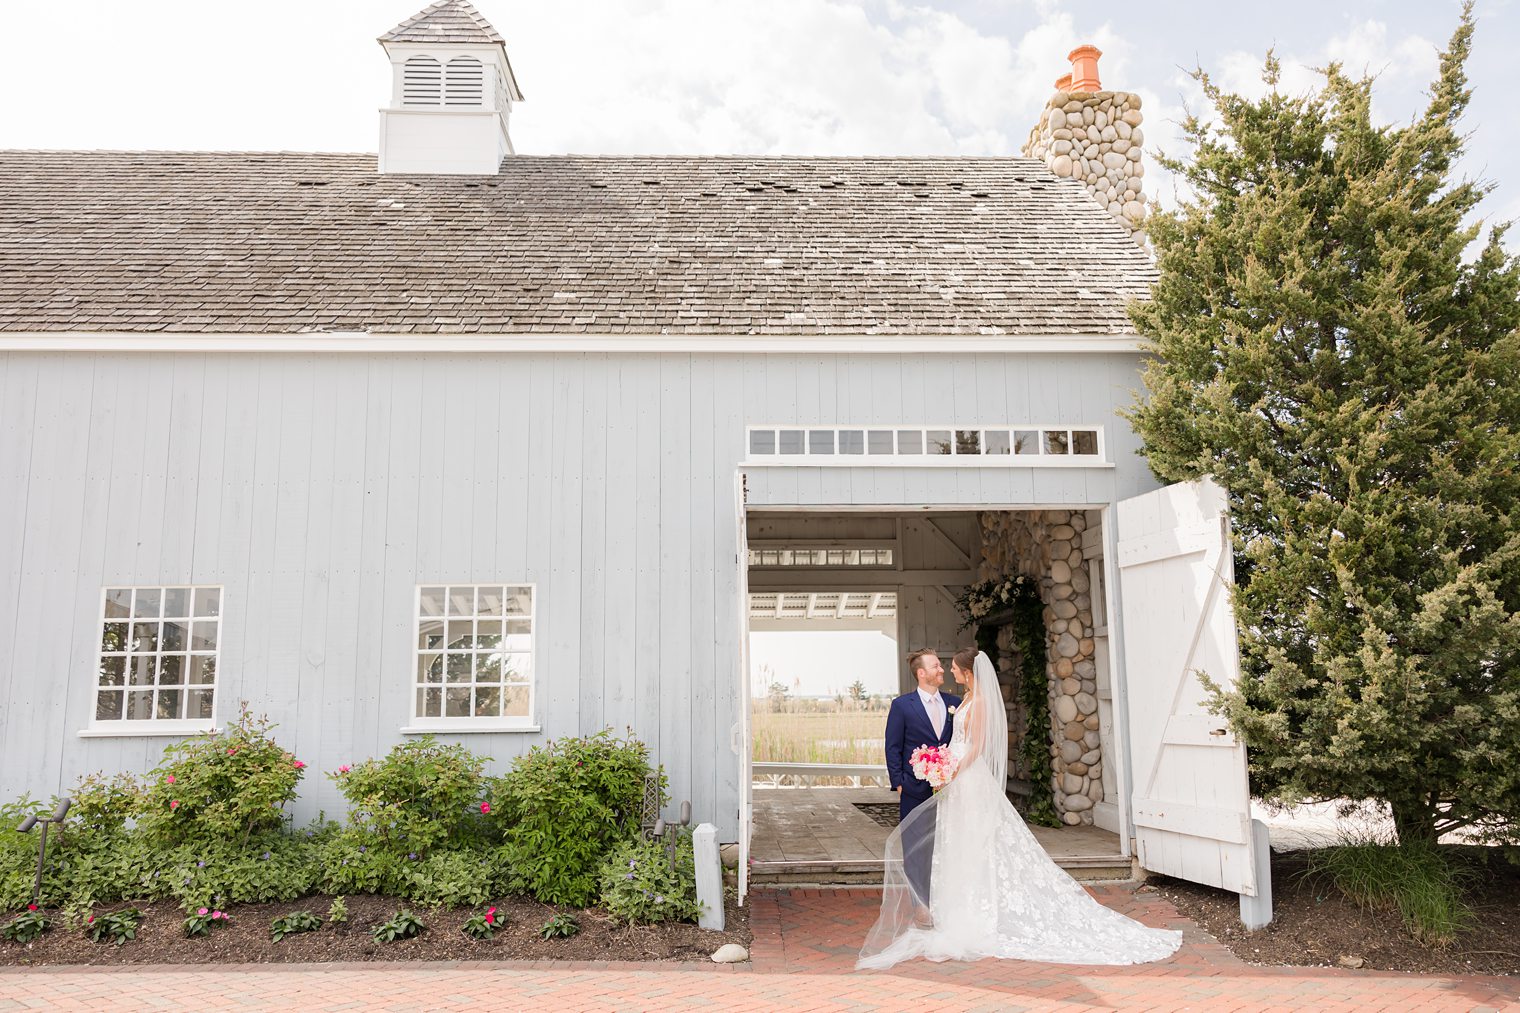 Bride and groom posing in front their venue at Bonnet Island Estate